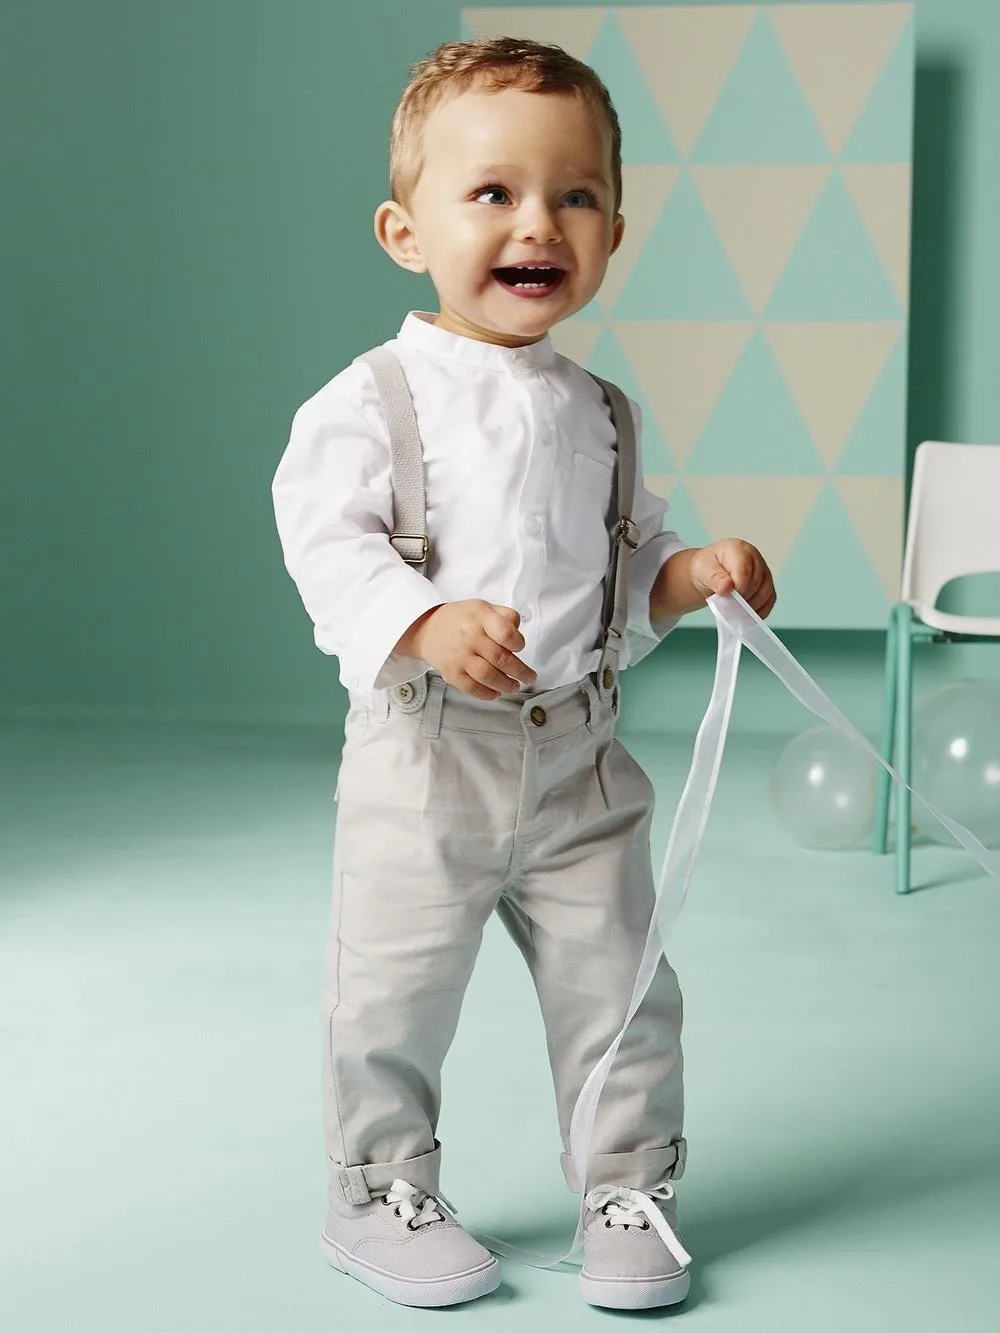 Boys Long-sleeved White Shirt + Beige Strap Trousers Outfit Suit ...